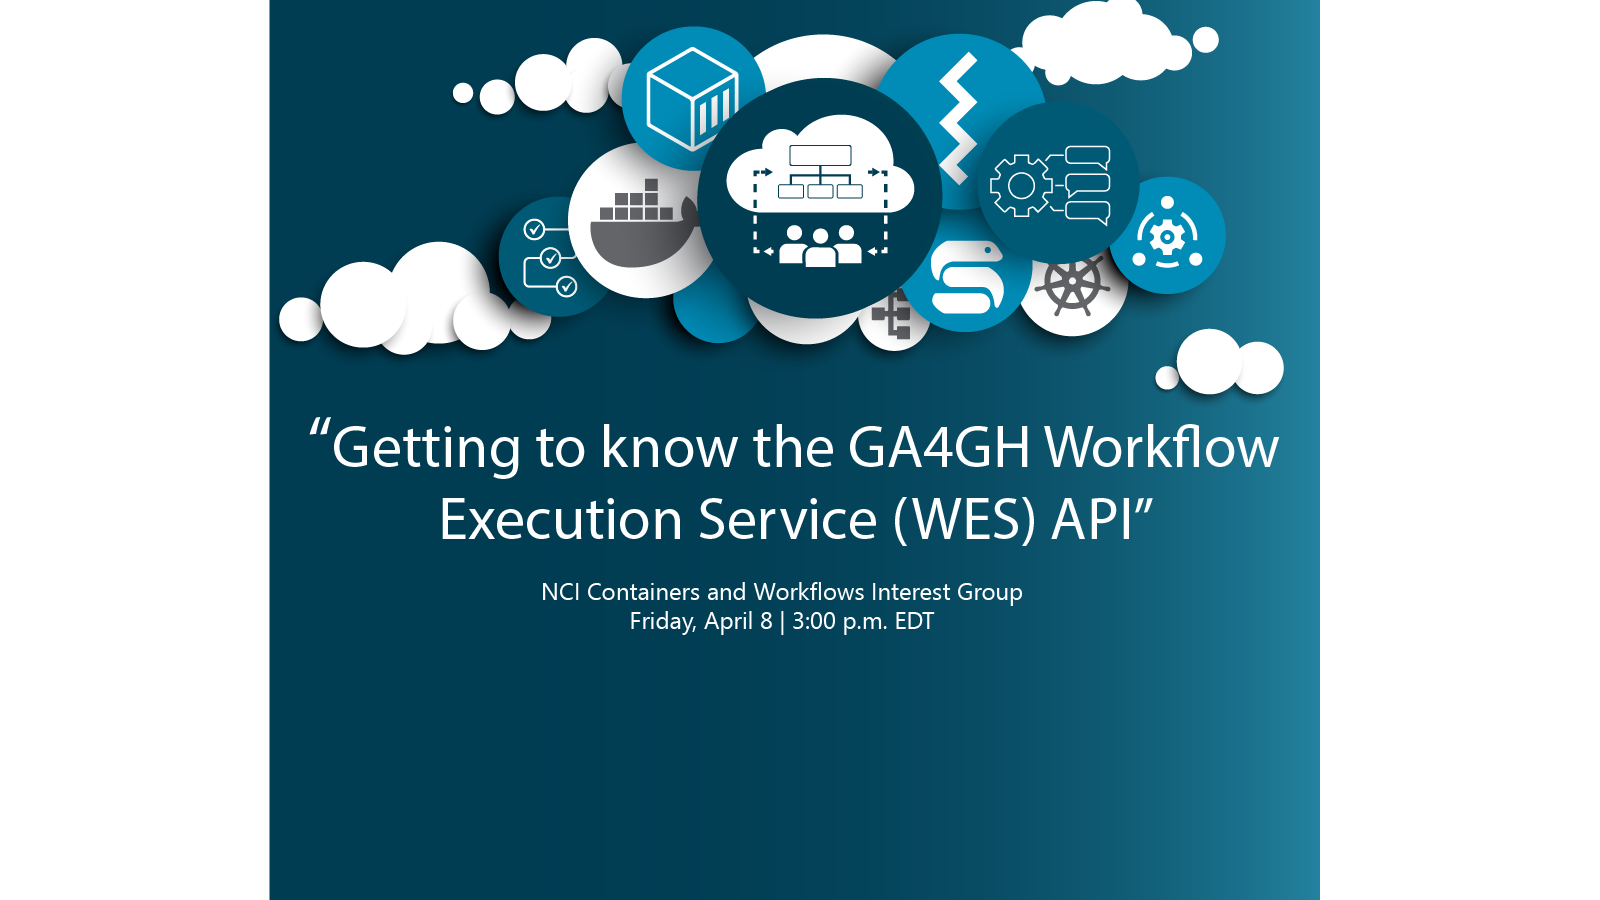 Decorative image with text: Getting to know the Ga4GH Workflow Execution Service (WES) API", NCI Containers and Workflows Interest Group Webinar, Friday, April 8, 3:00 p.m. EDT